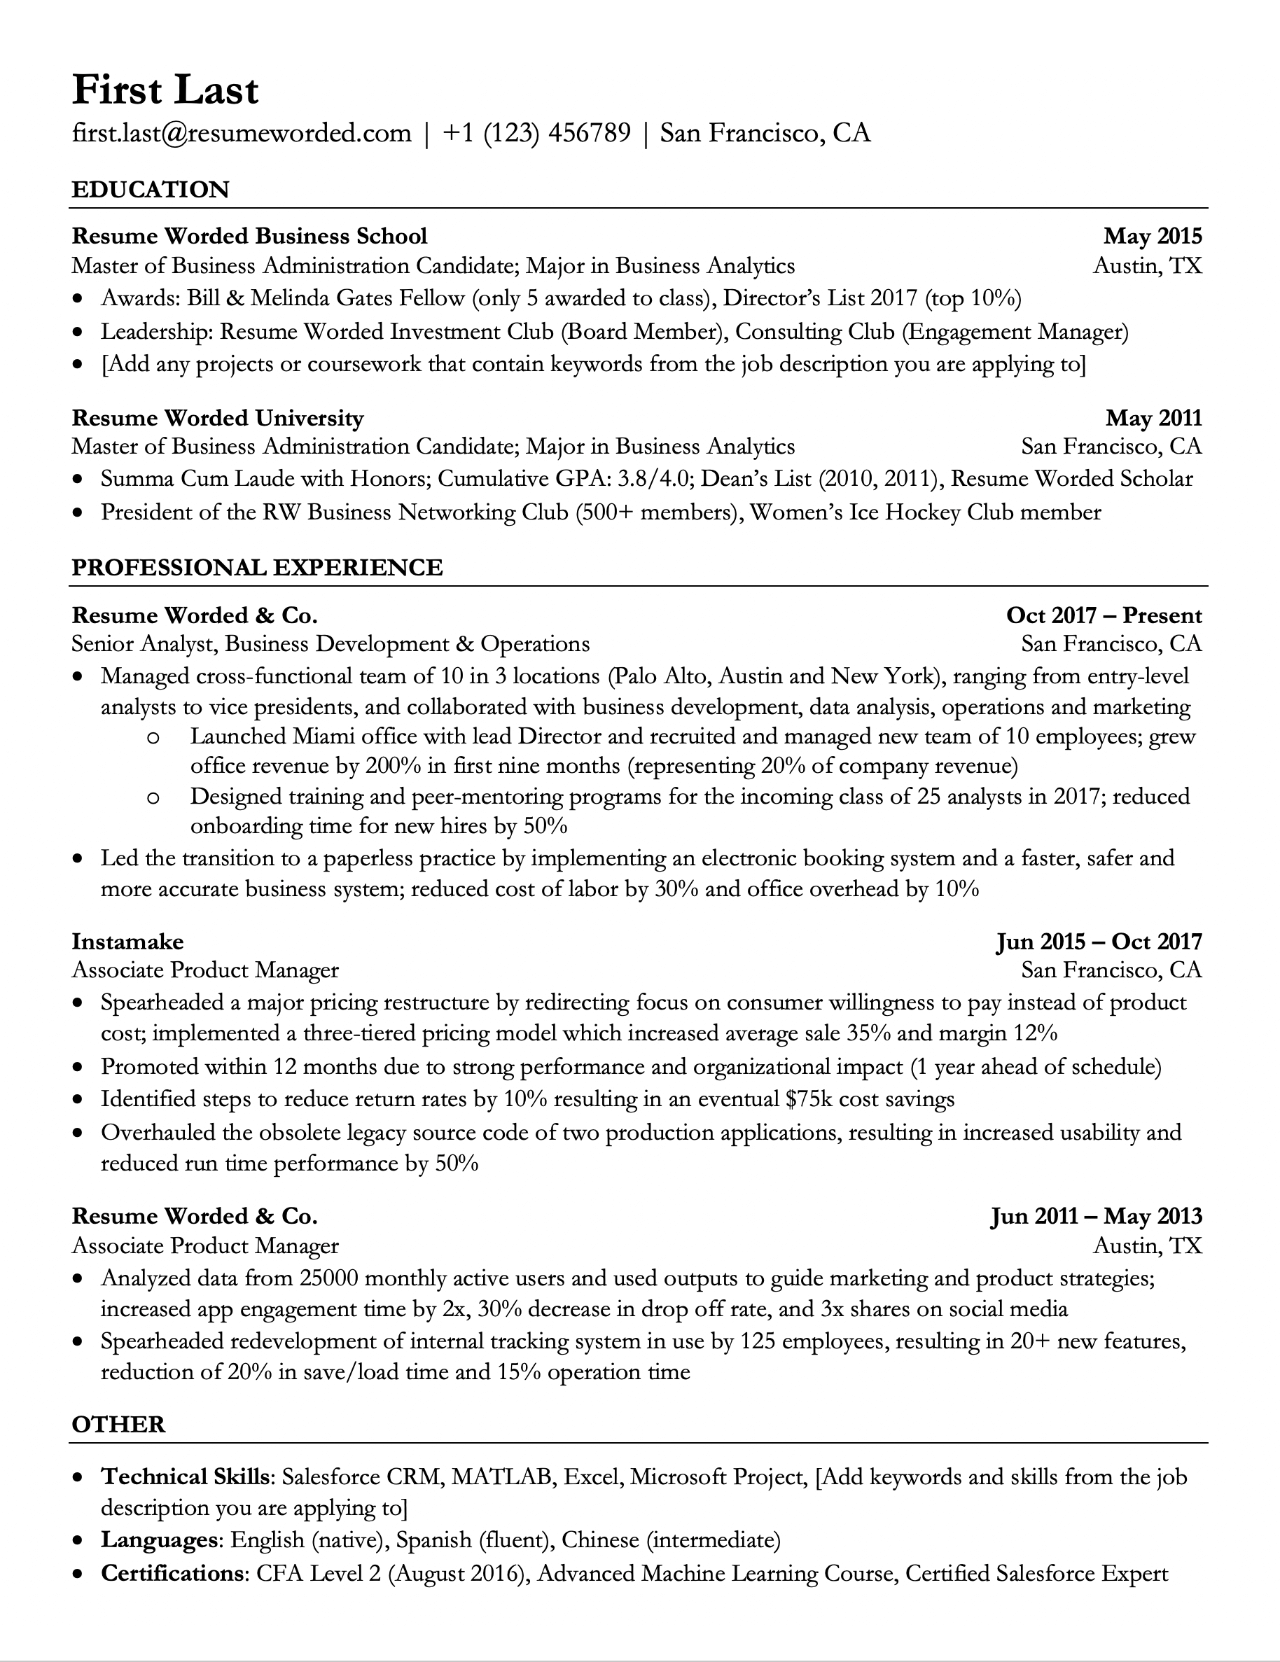 ATS resume template for entry level college graduates